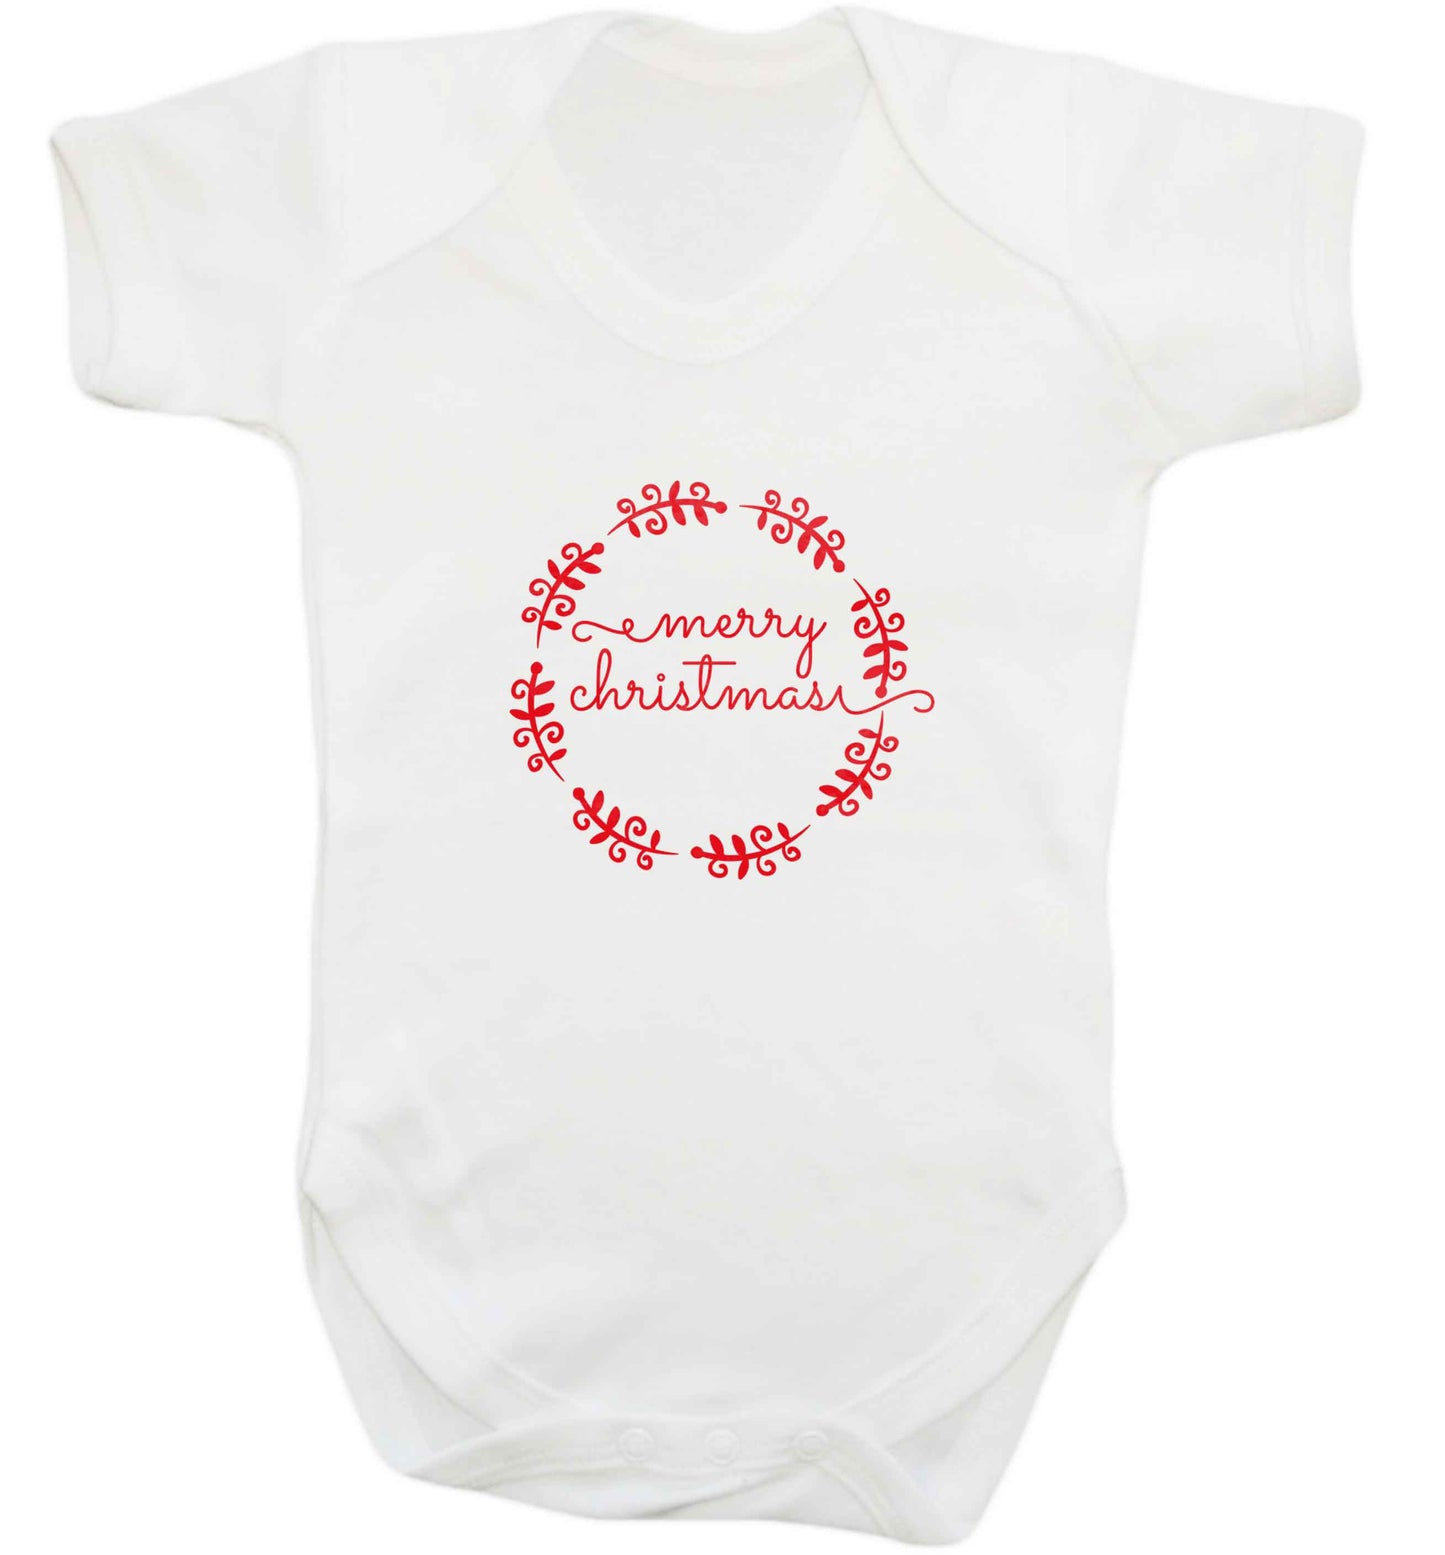 Merry christmas baby vest white 18-24 months